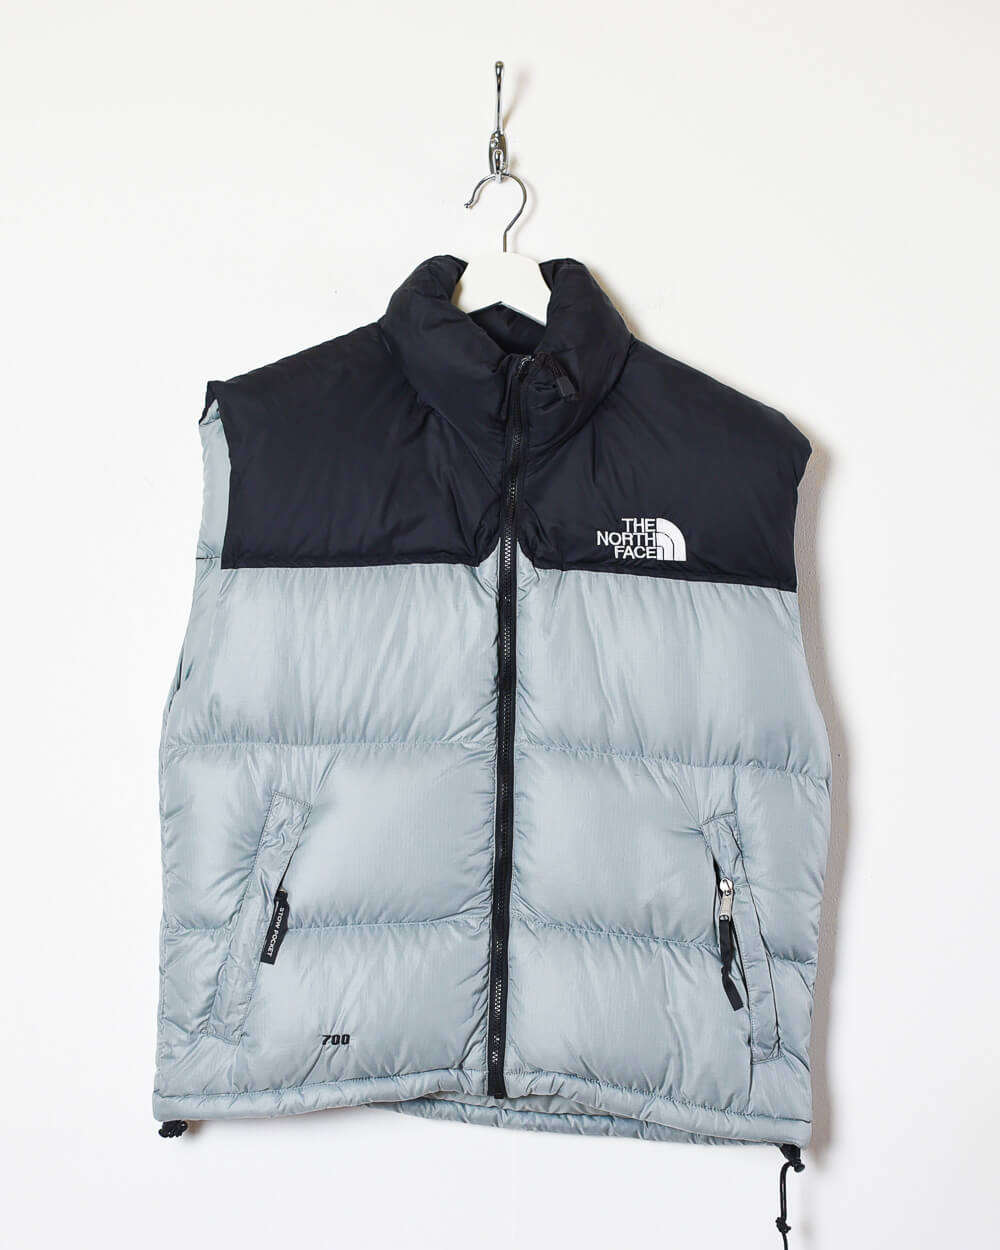 gilet north face 700